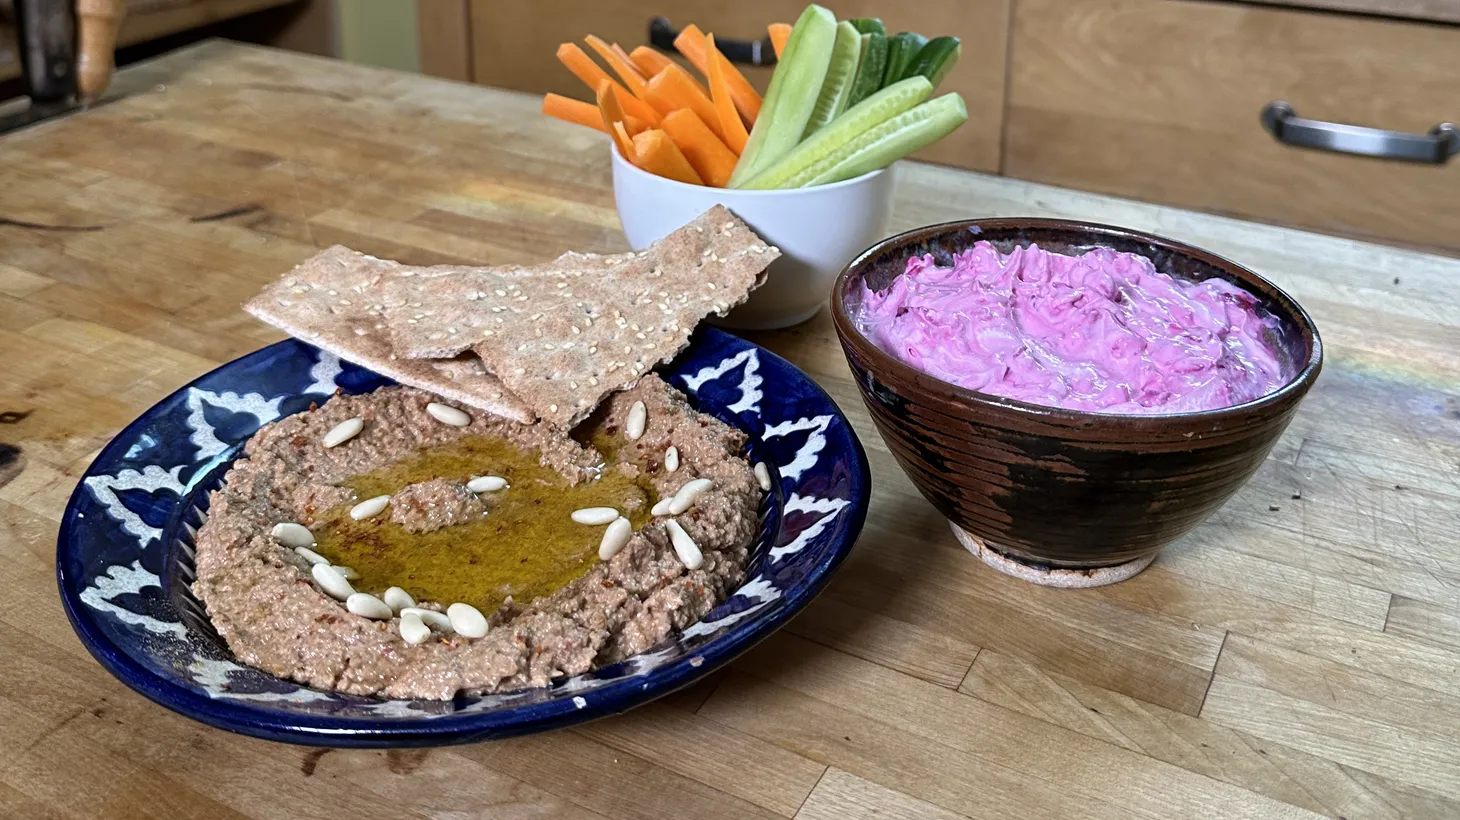 Garlicky beet labne (right), with its bright fuschia, is topped with garlic and a squeeze of lemon. Muhammara (left) is a Syrian mixture of roasted peppers pureed with walnuts and wheat crackers.